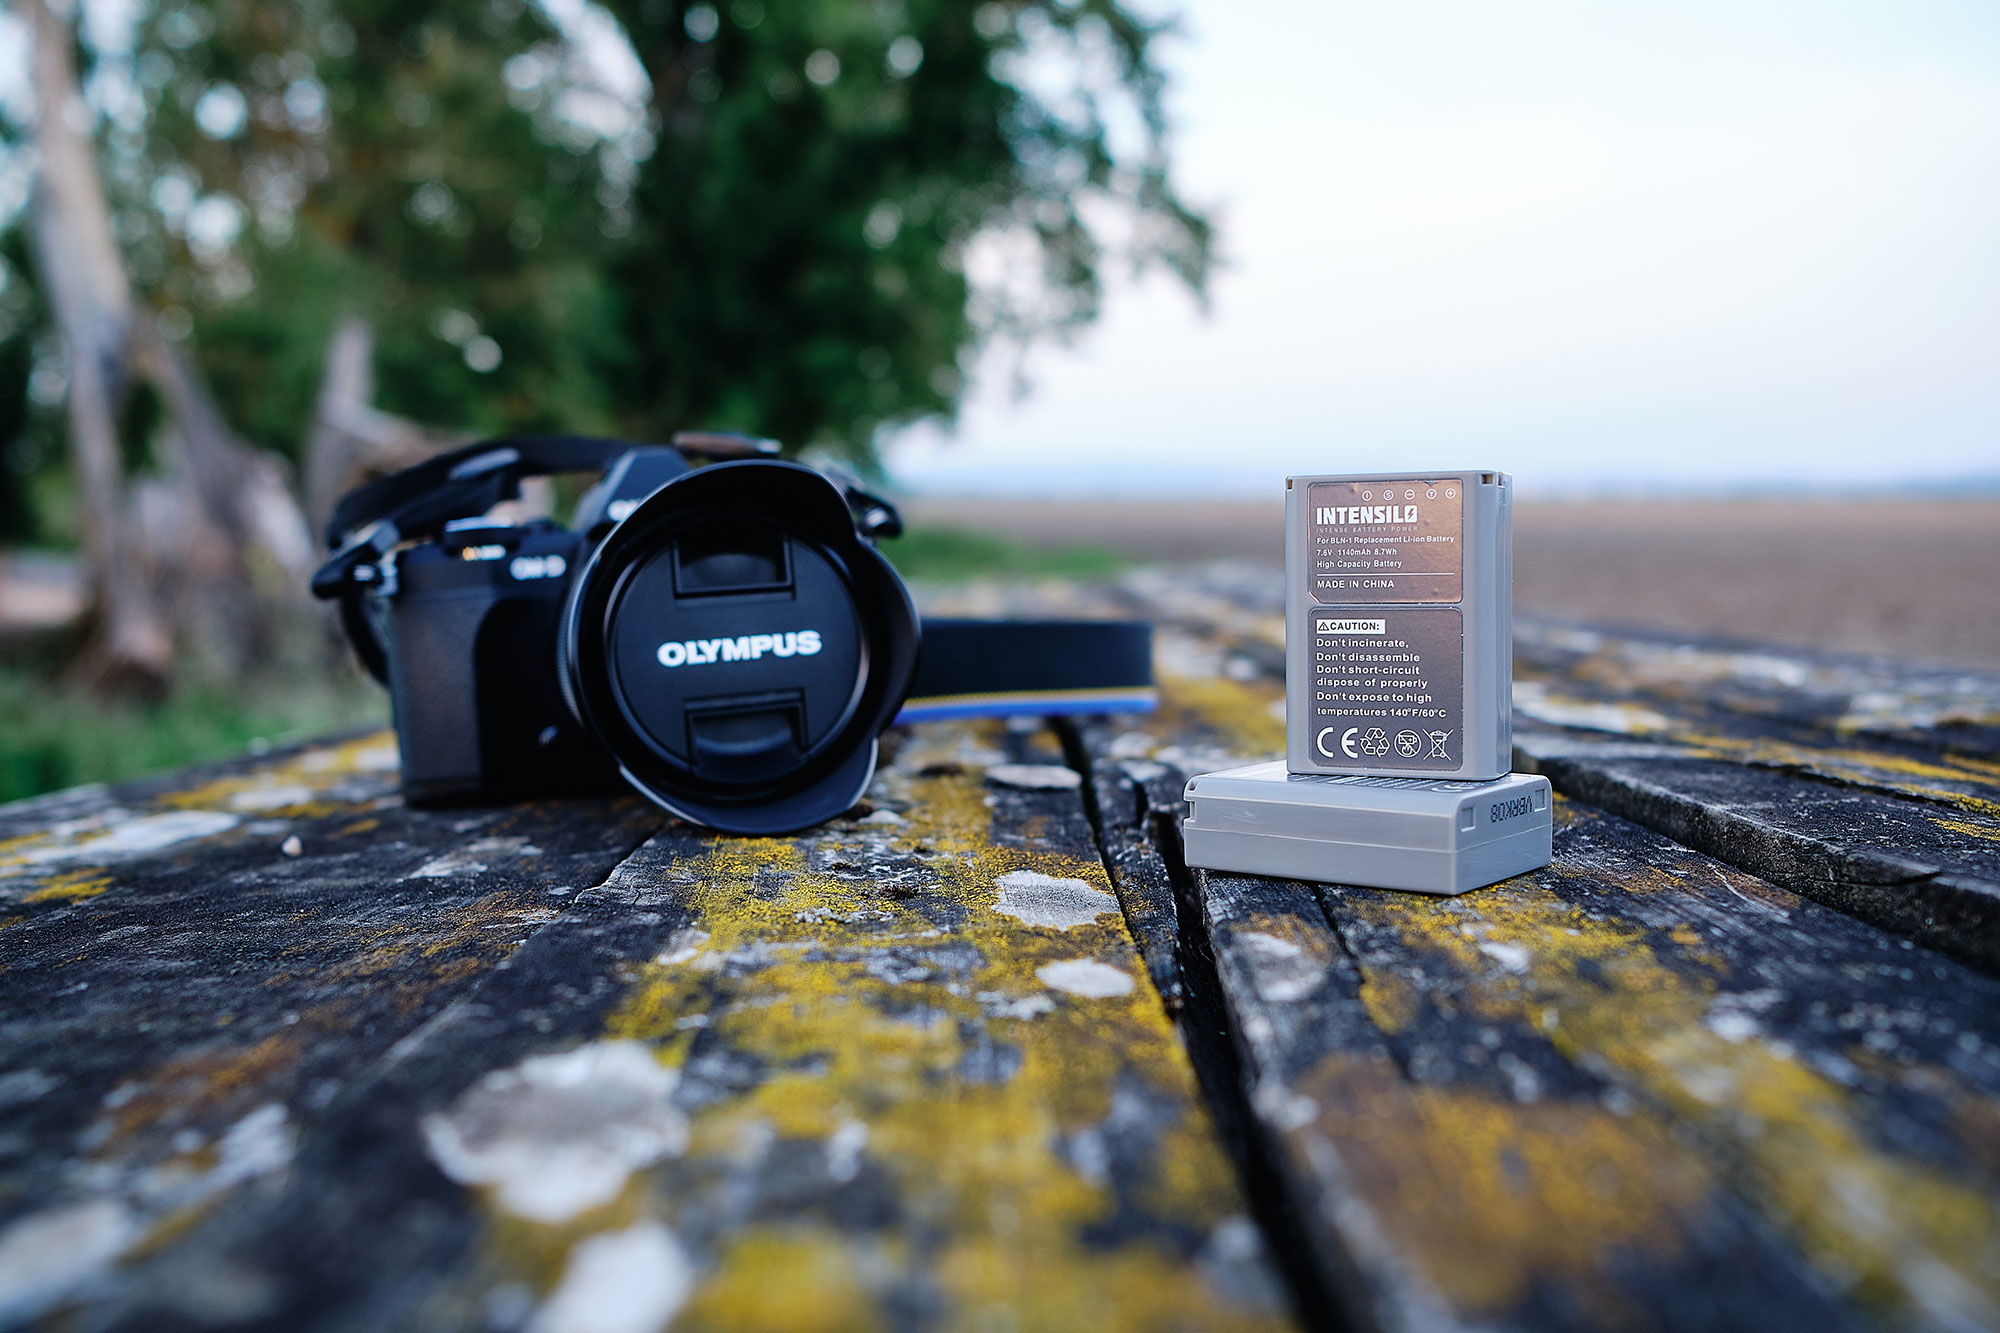 Premium/ How to improve the battery performance of your Olympus camera